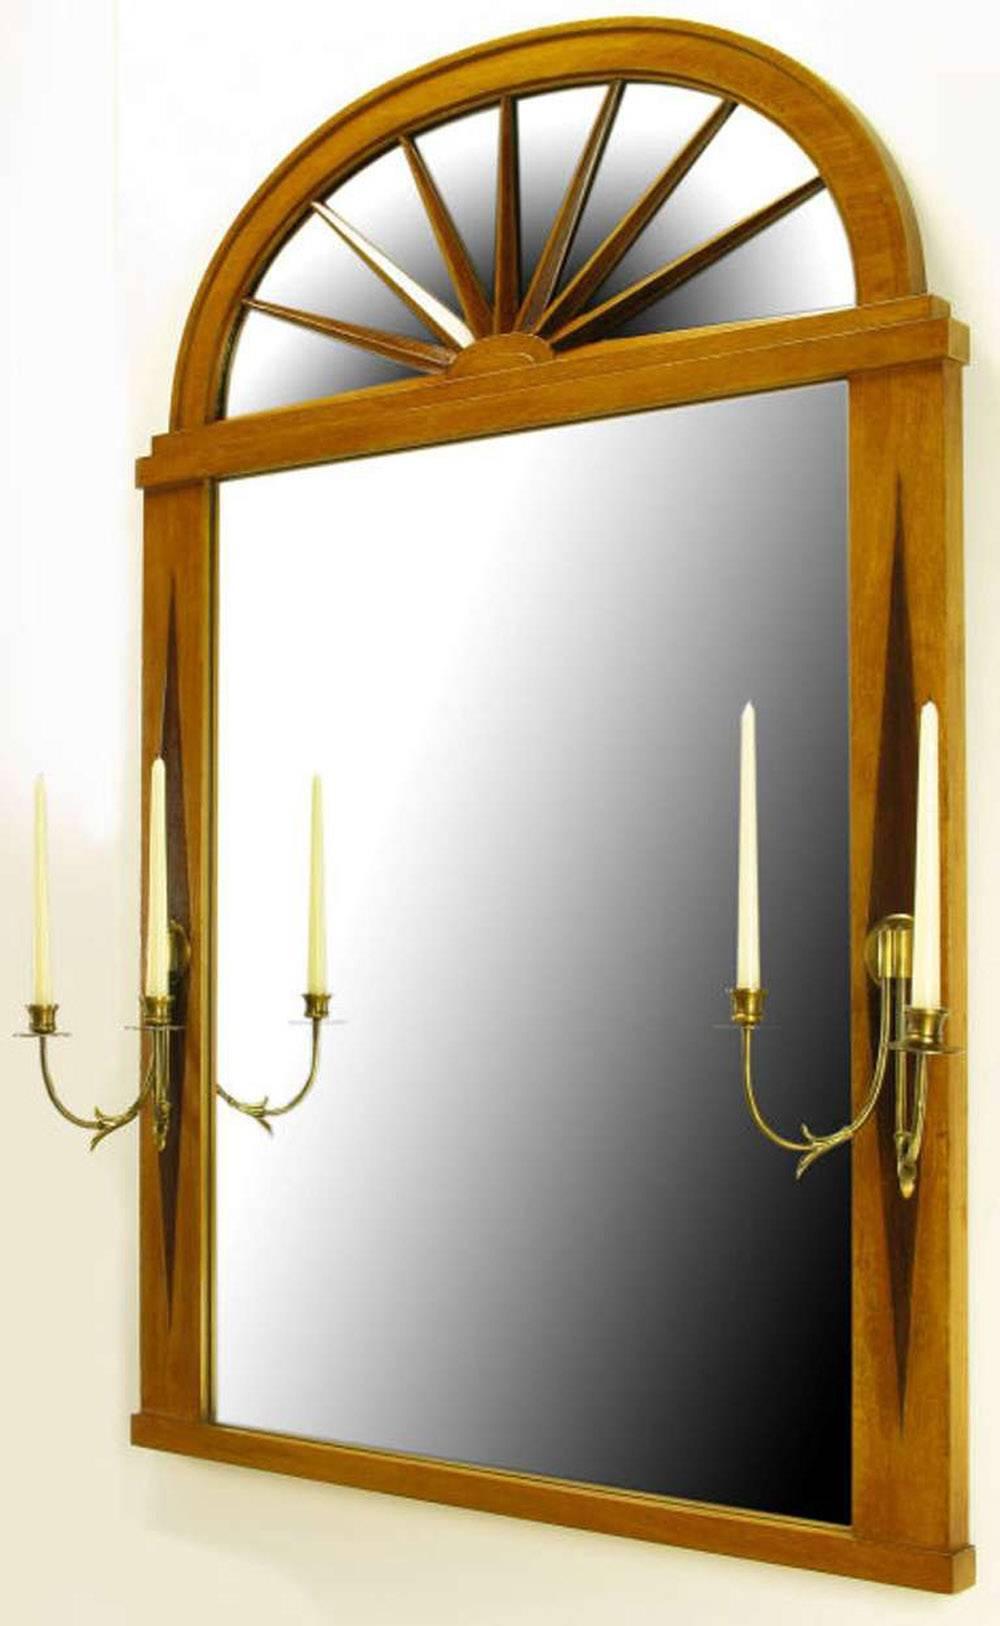 Grosfeld House Empire style mirror with arched top carved wood sunburst over mirror. Framed in bleached mahogany with contrasting dark walnut diamond shape inlay. At the middle of each diamond is a two-arm brass candelabra sconce.

Sconces extend